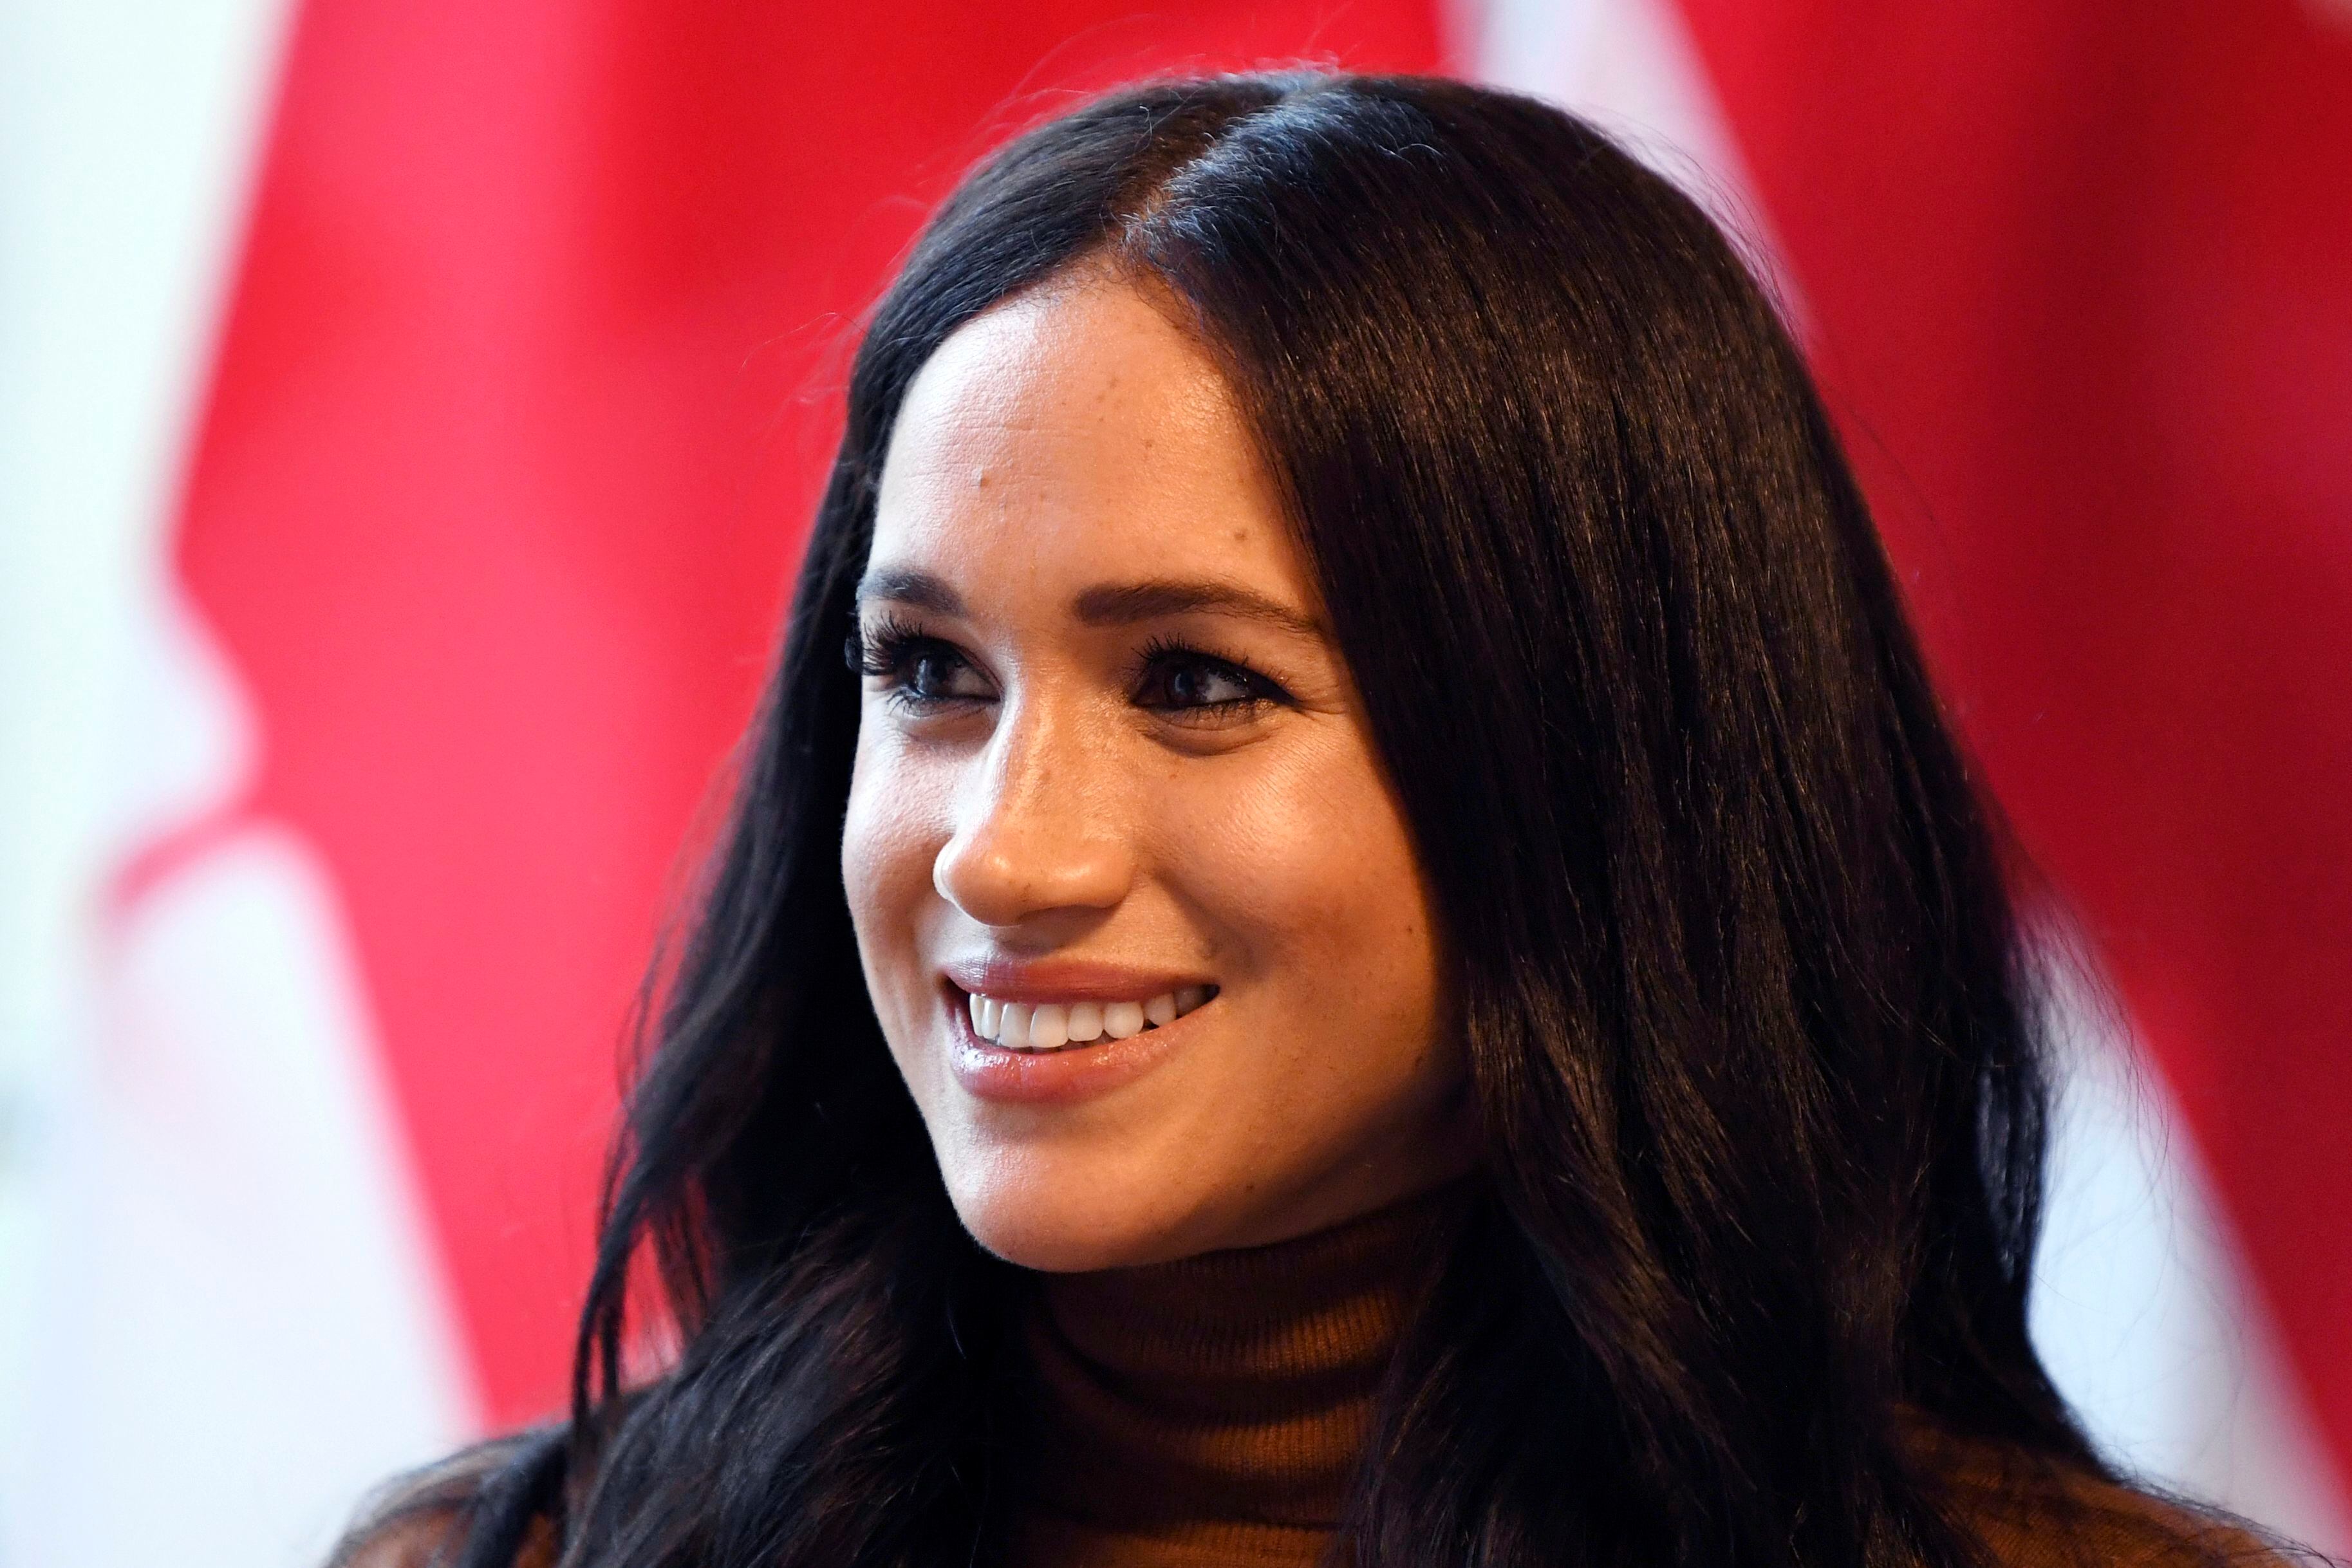 Palace to investigate after Meghan accused of bullying staff